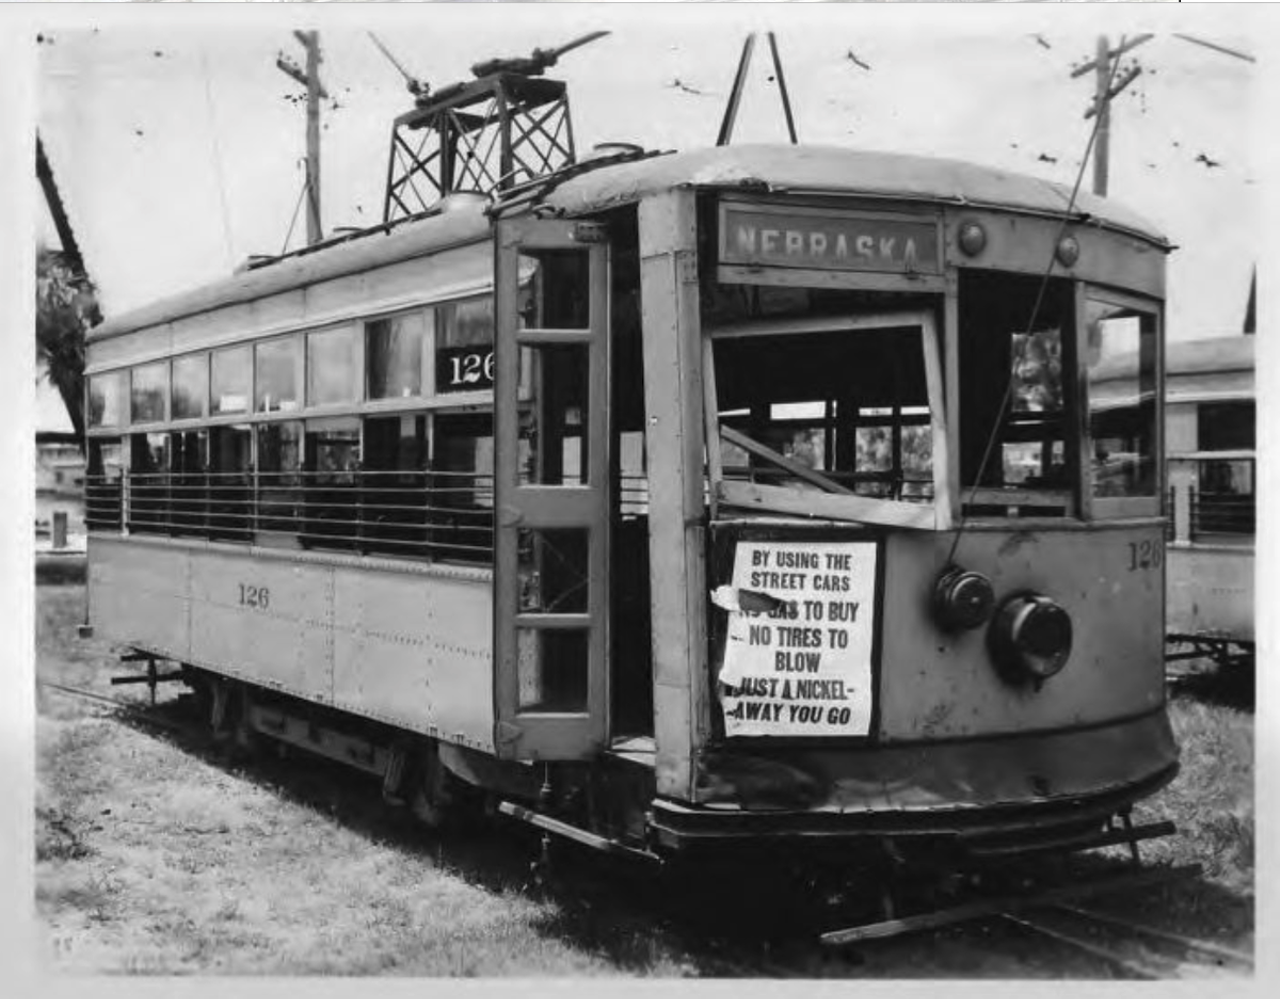 Streetcar, Nebraska Line Car #126, damaged in accident, front and side view, includes rhymed advertising poster extolling trolley use in Tampa, Fla. on July 7, 1928.
Photo by Burgert Brothers via Tampa-Hillsborough County Public Library System